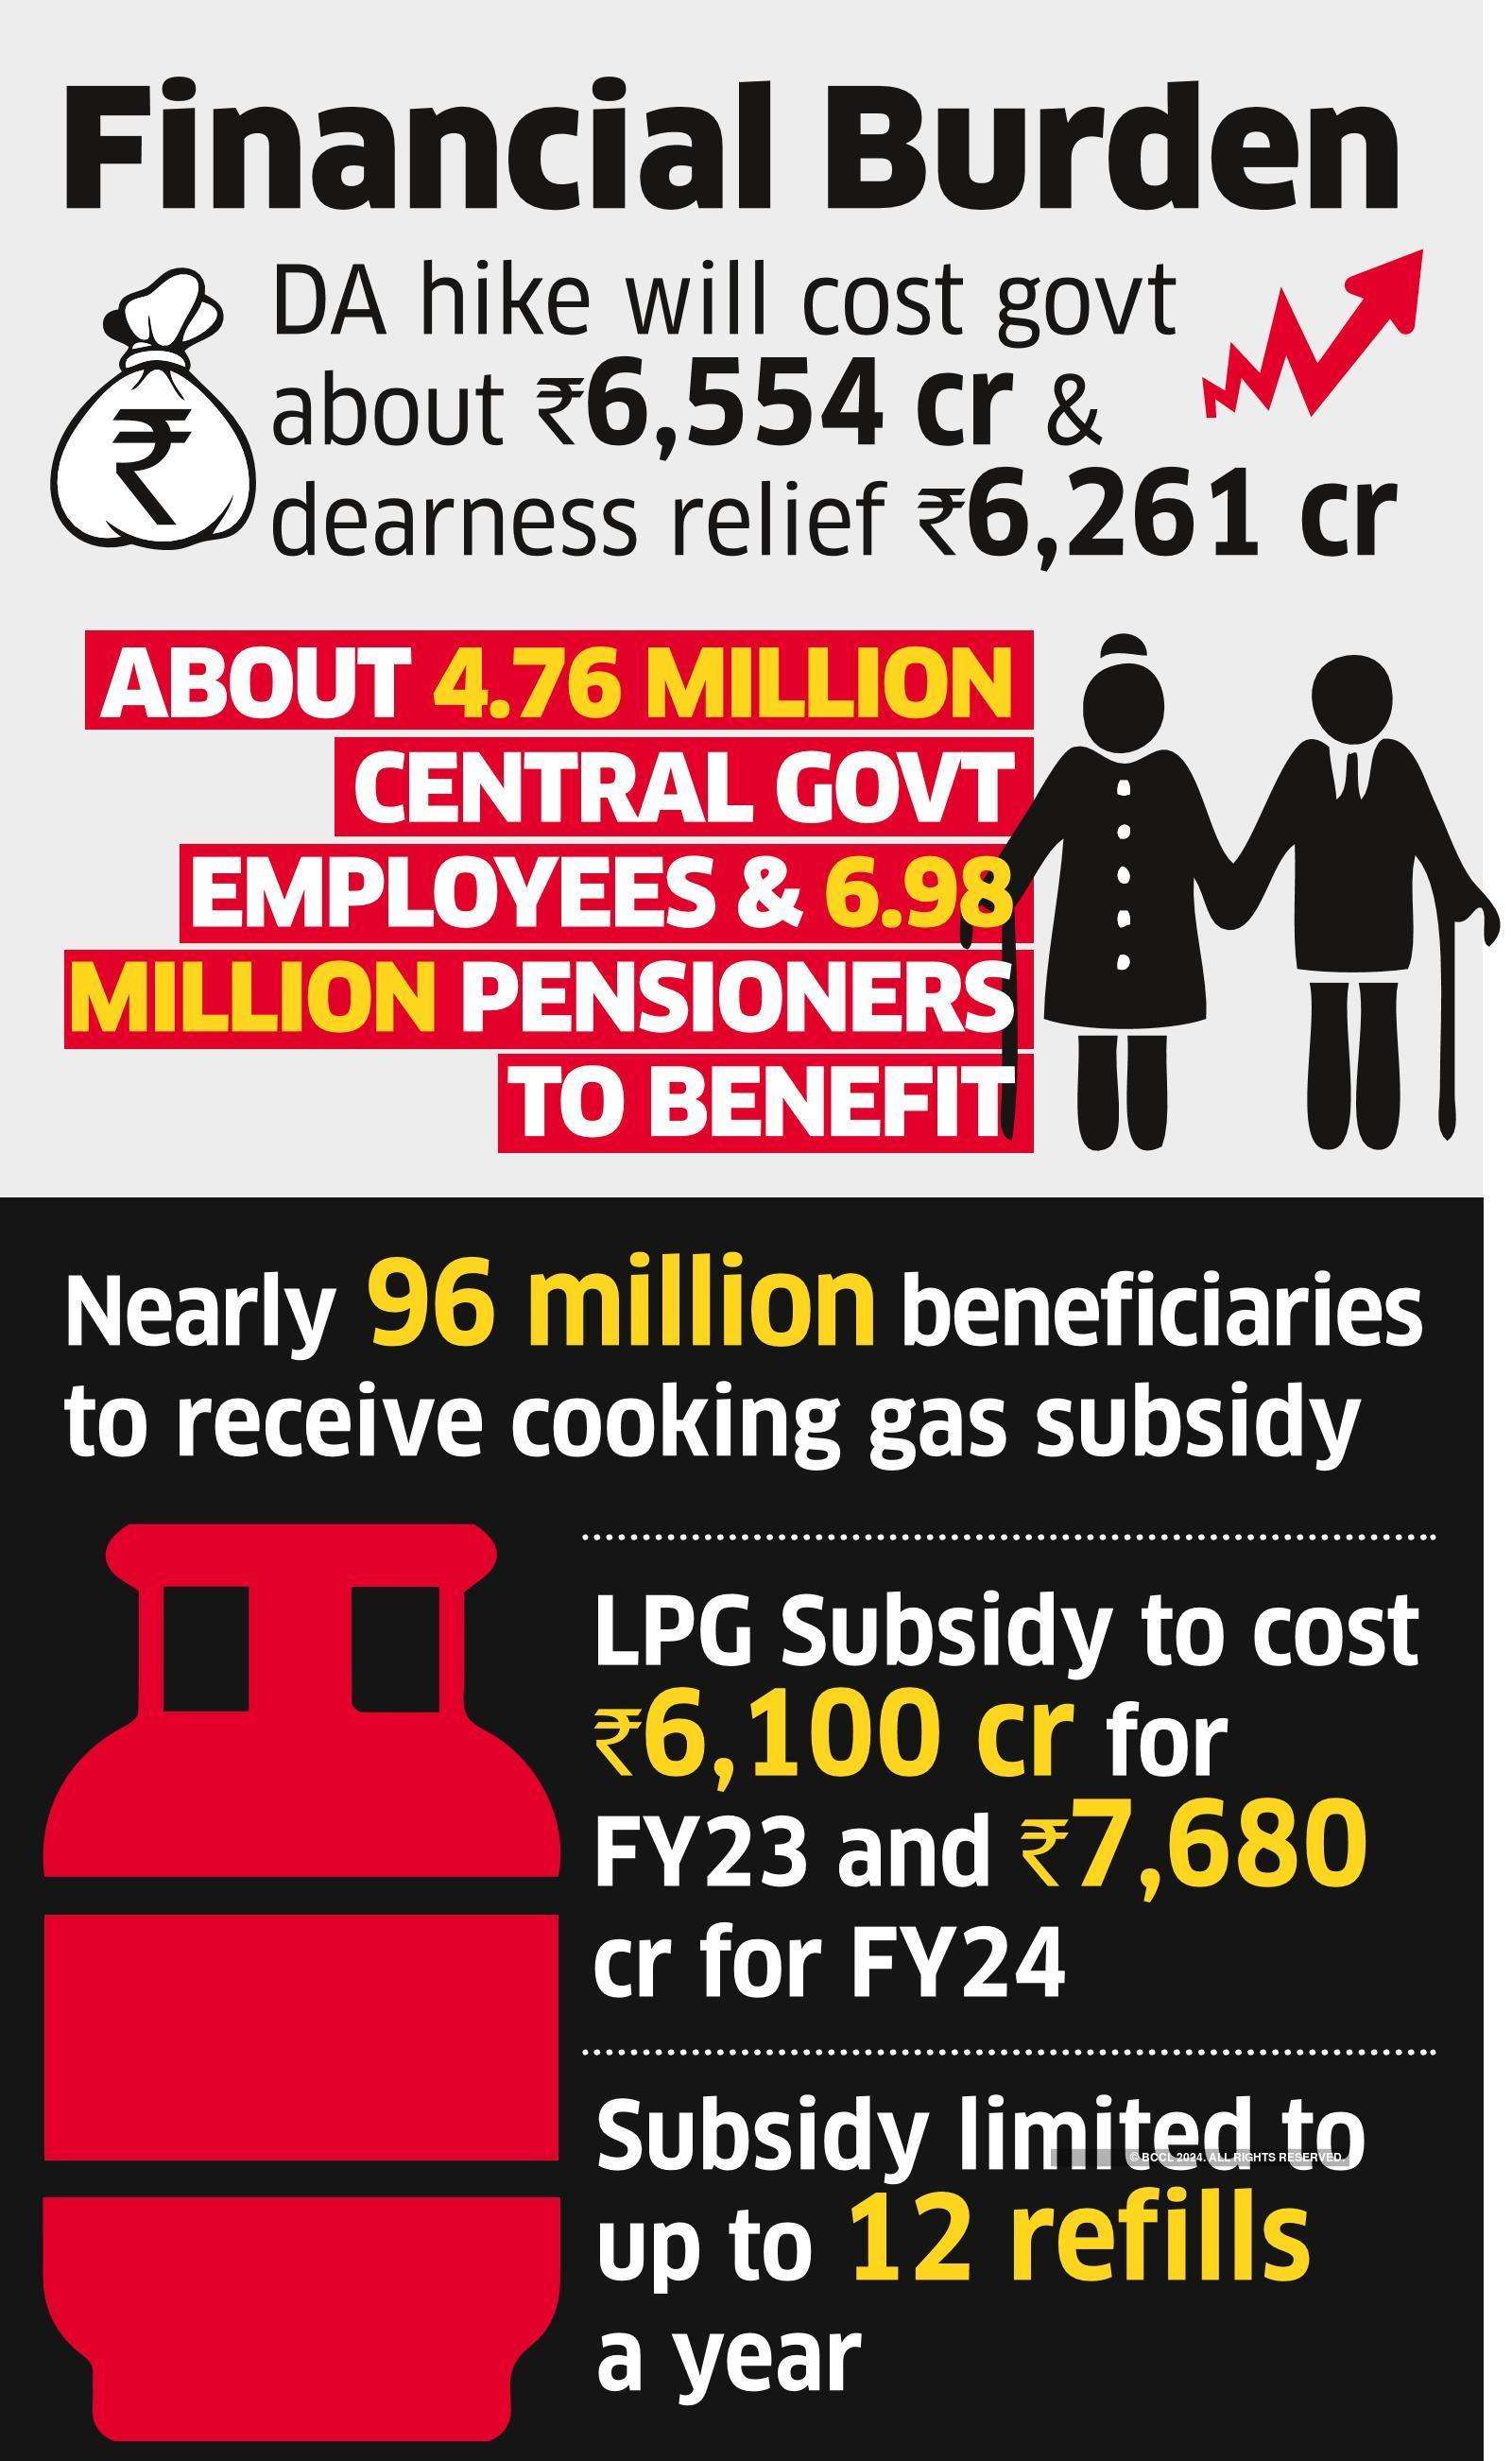 Cabinet clears DA hike of 4 per cent, Rs 200 LPG subsidy - The Economic Times